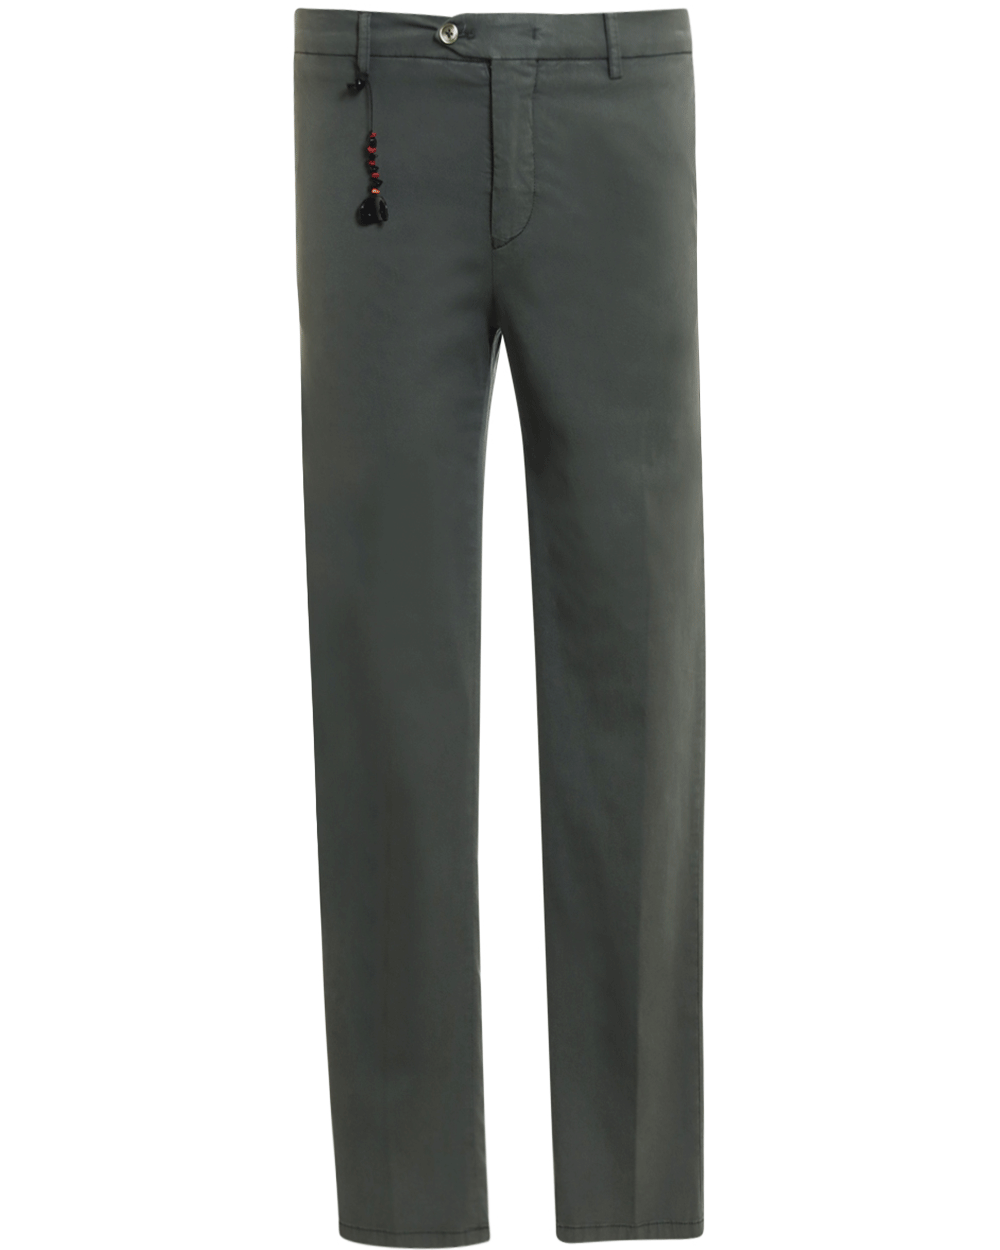 Olive Lyocell Blend Stretch Evo Casual Pant